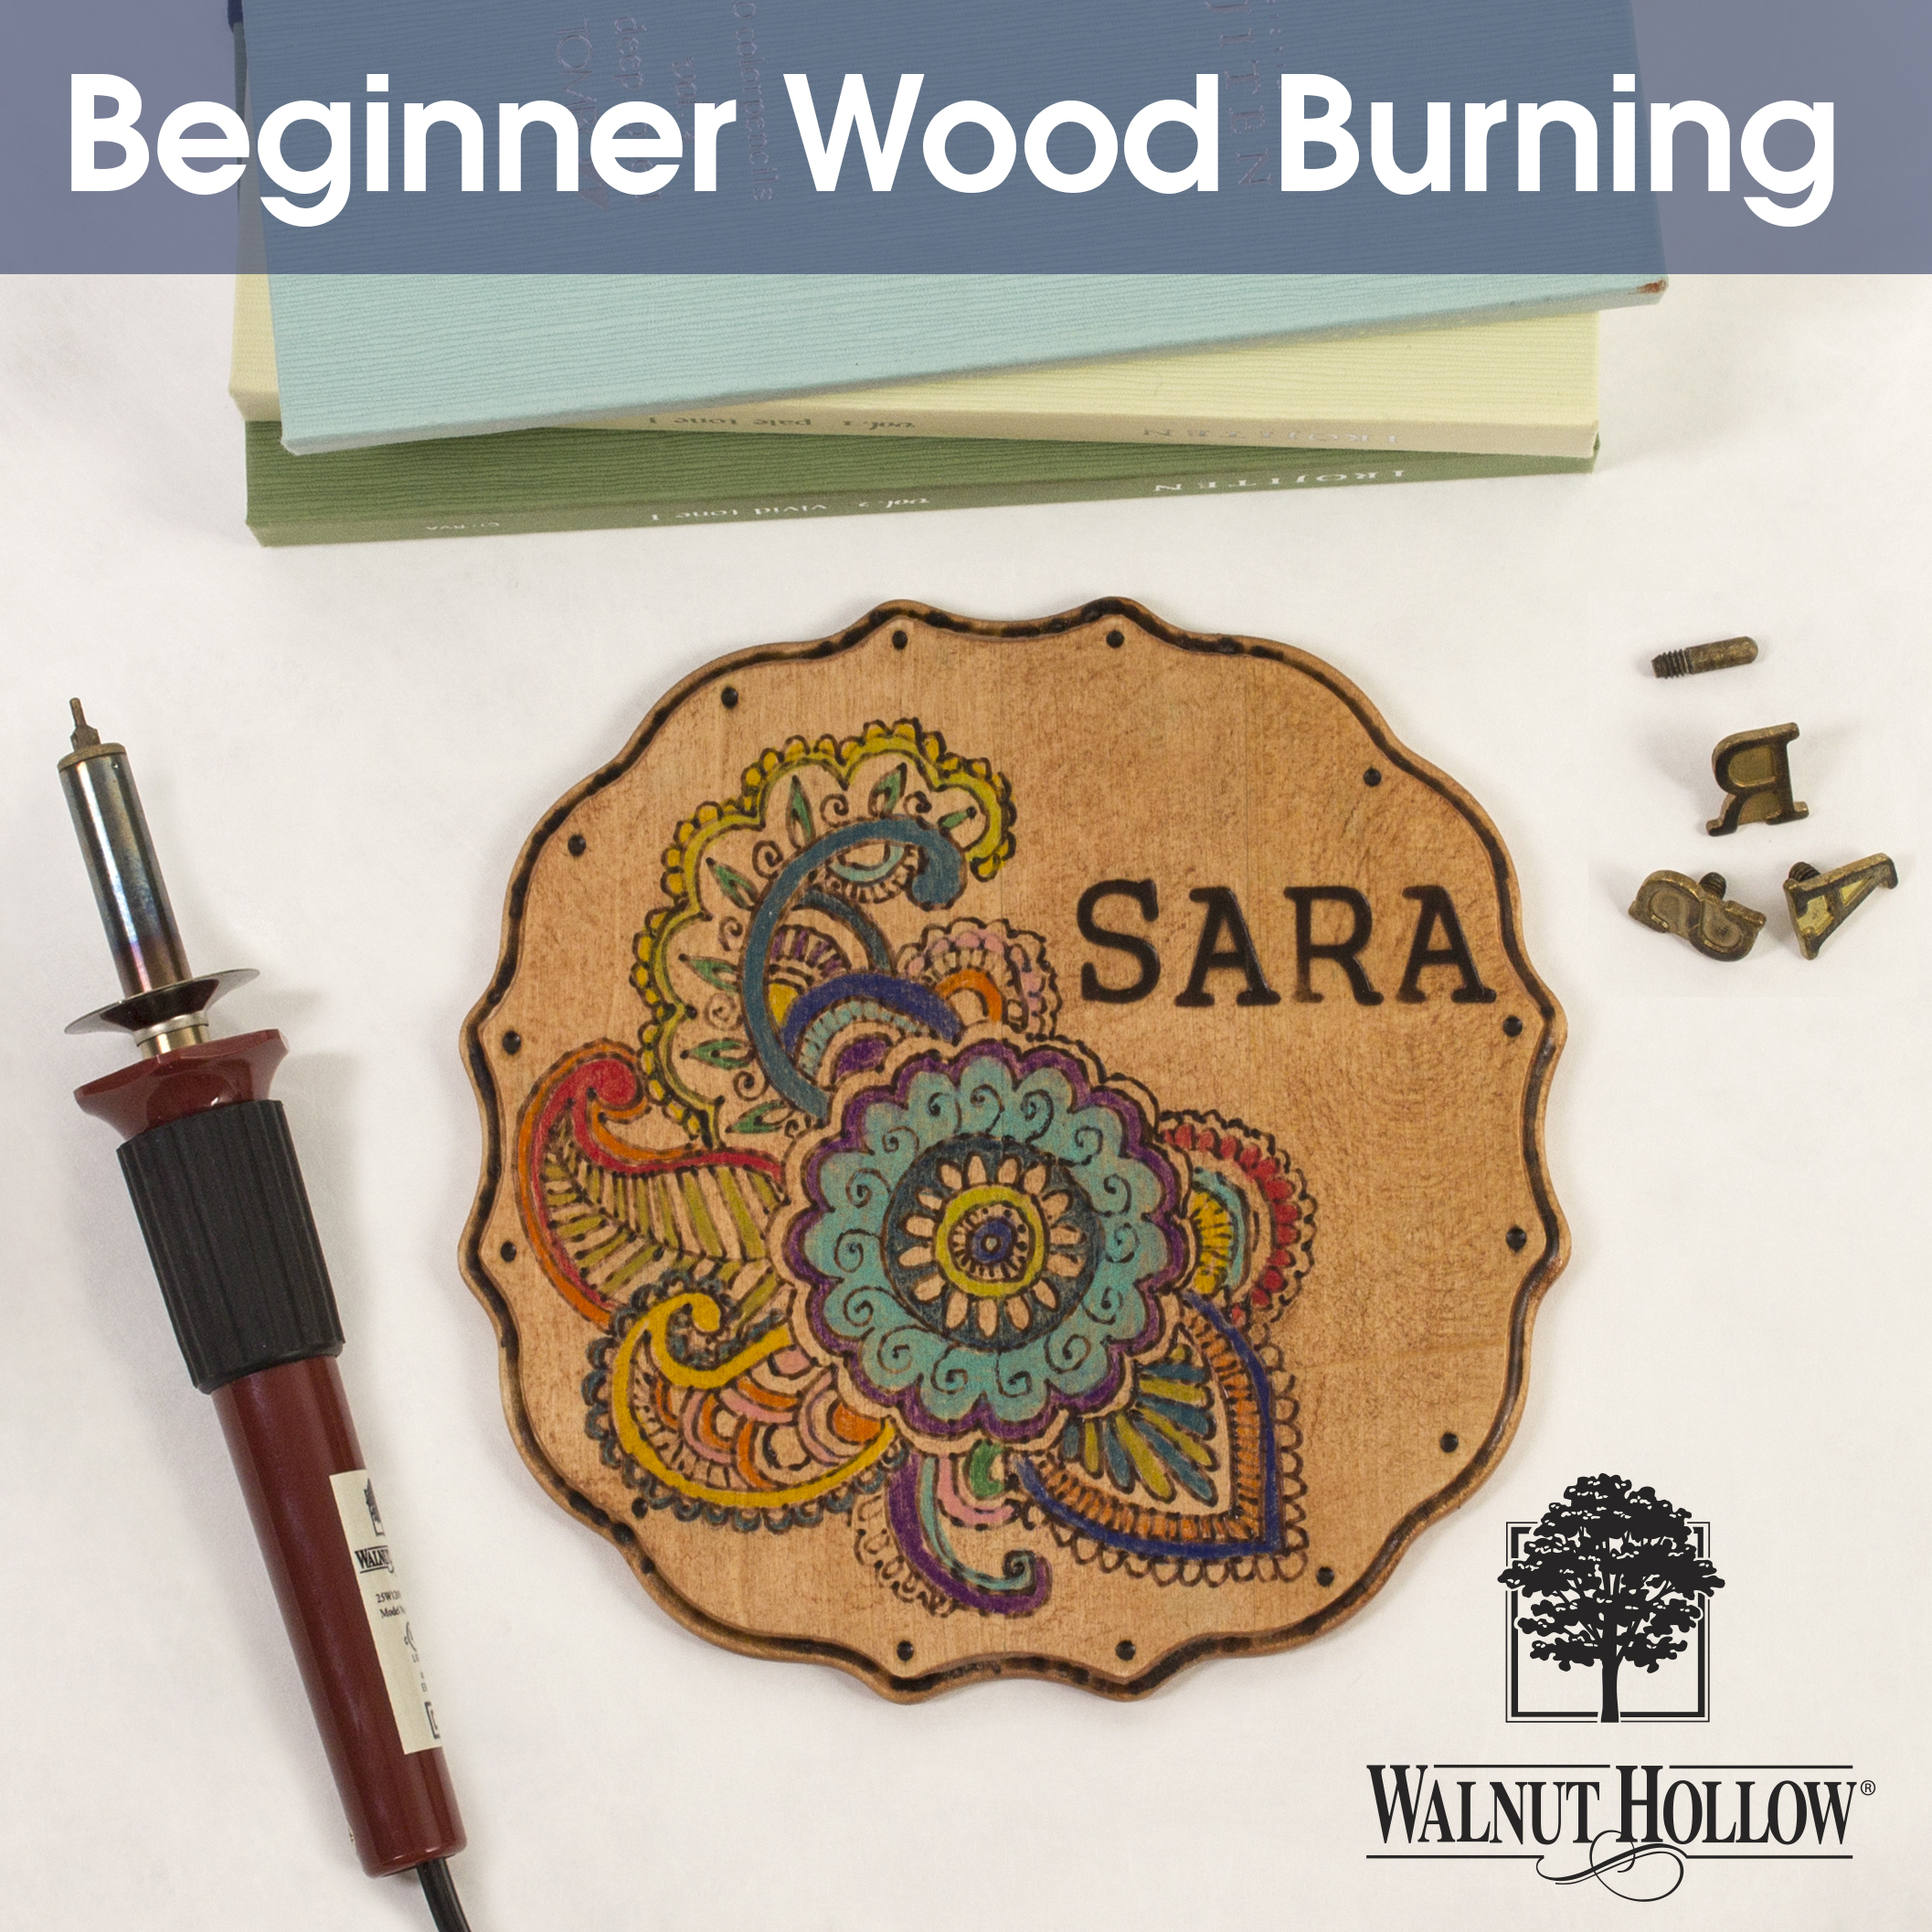 Wood-Burning Projects